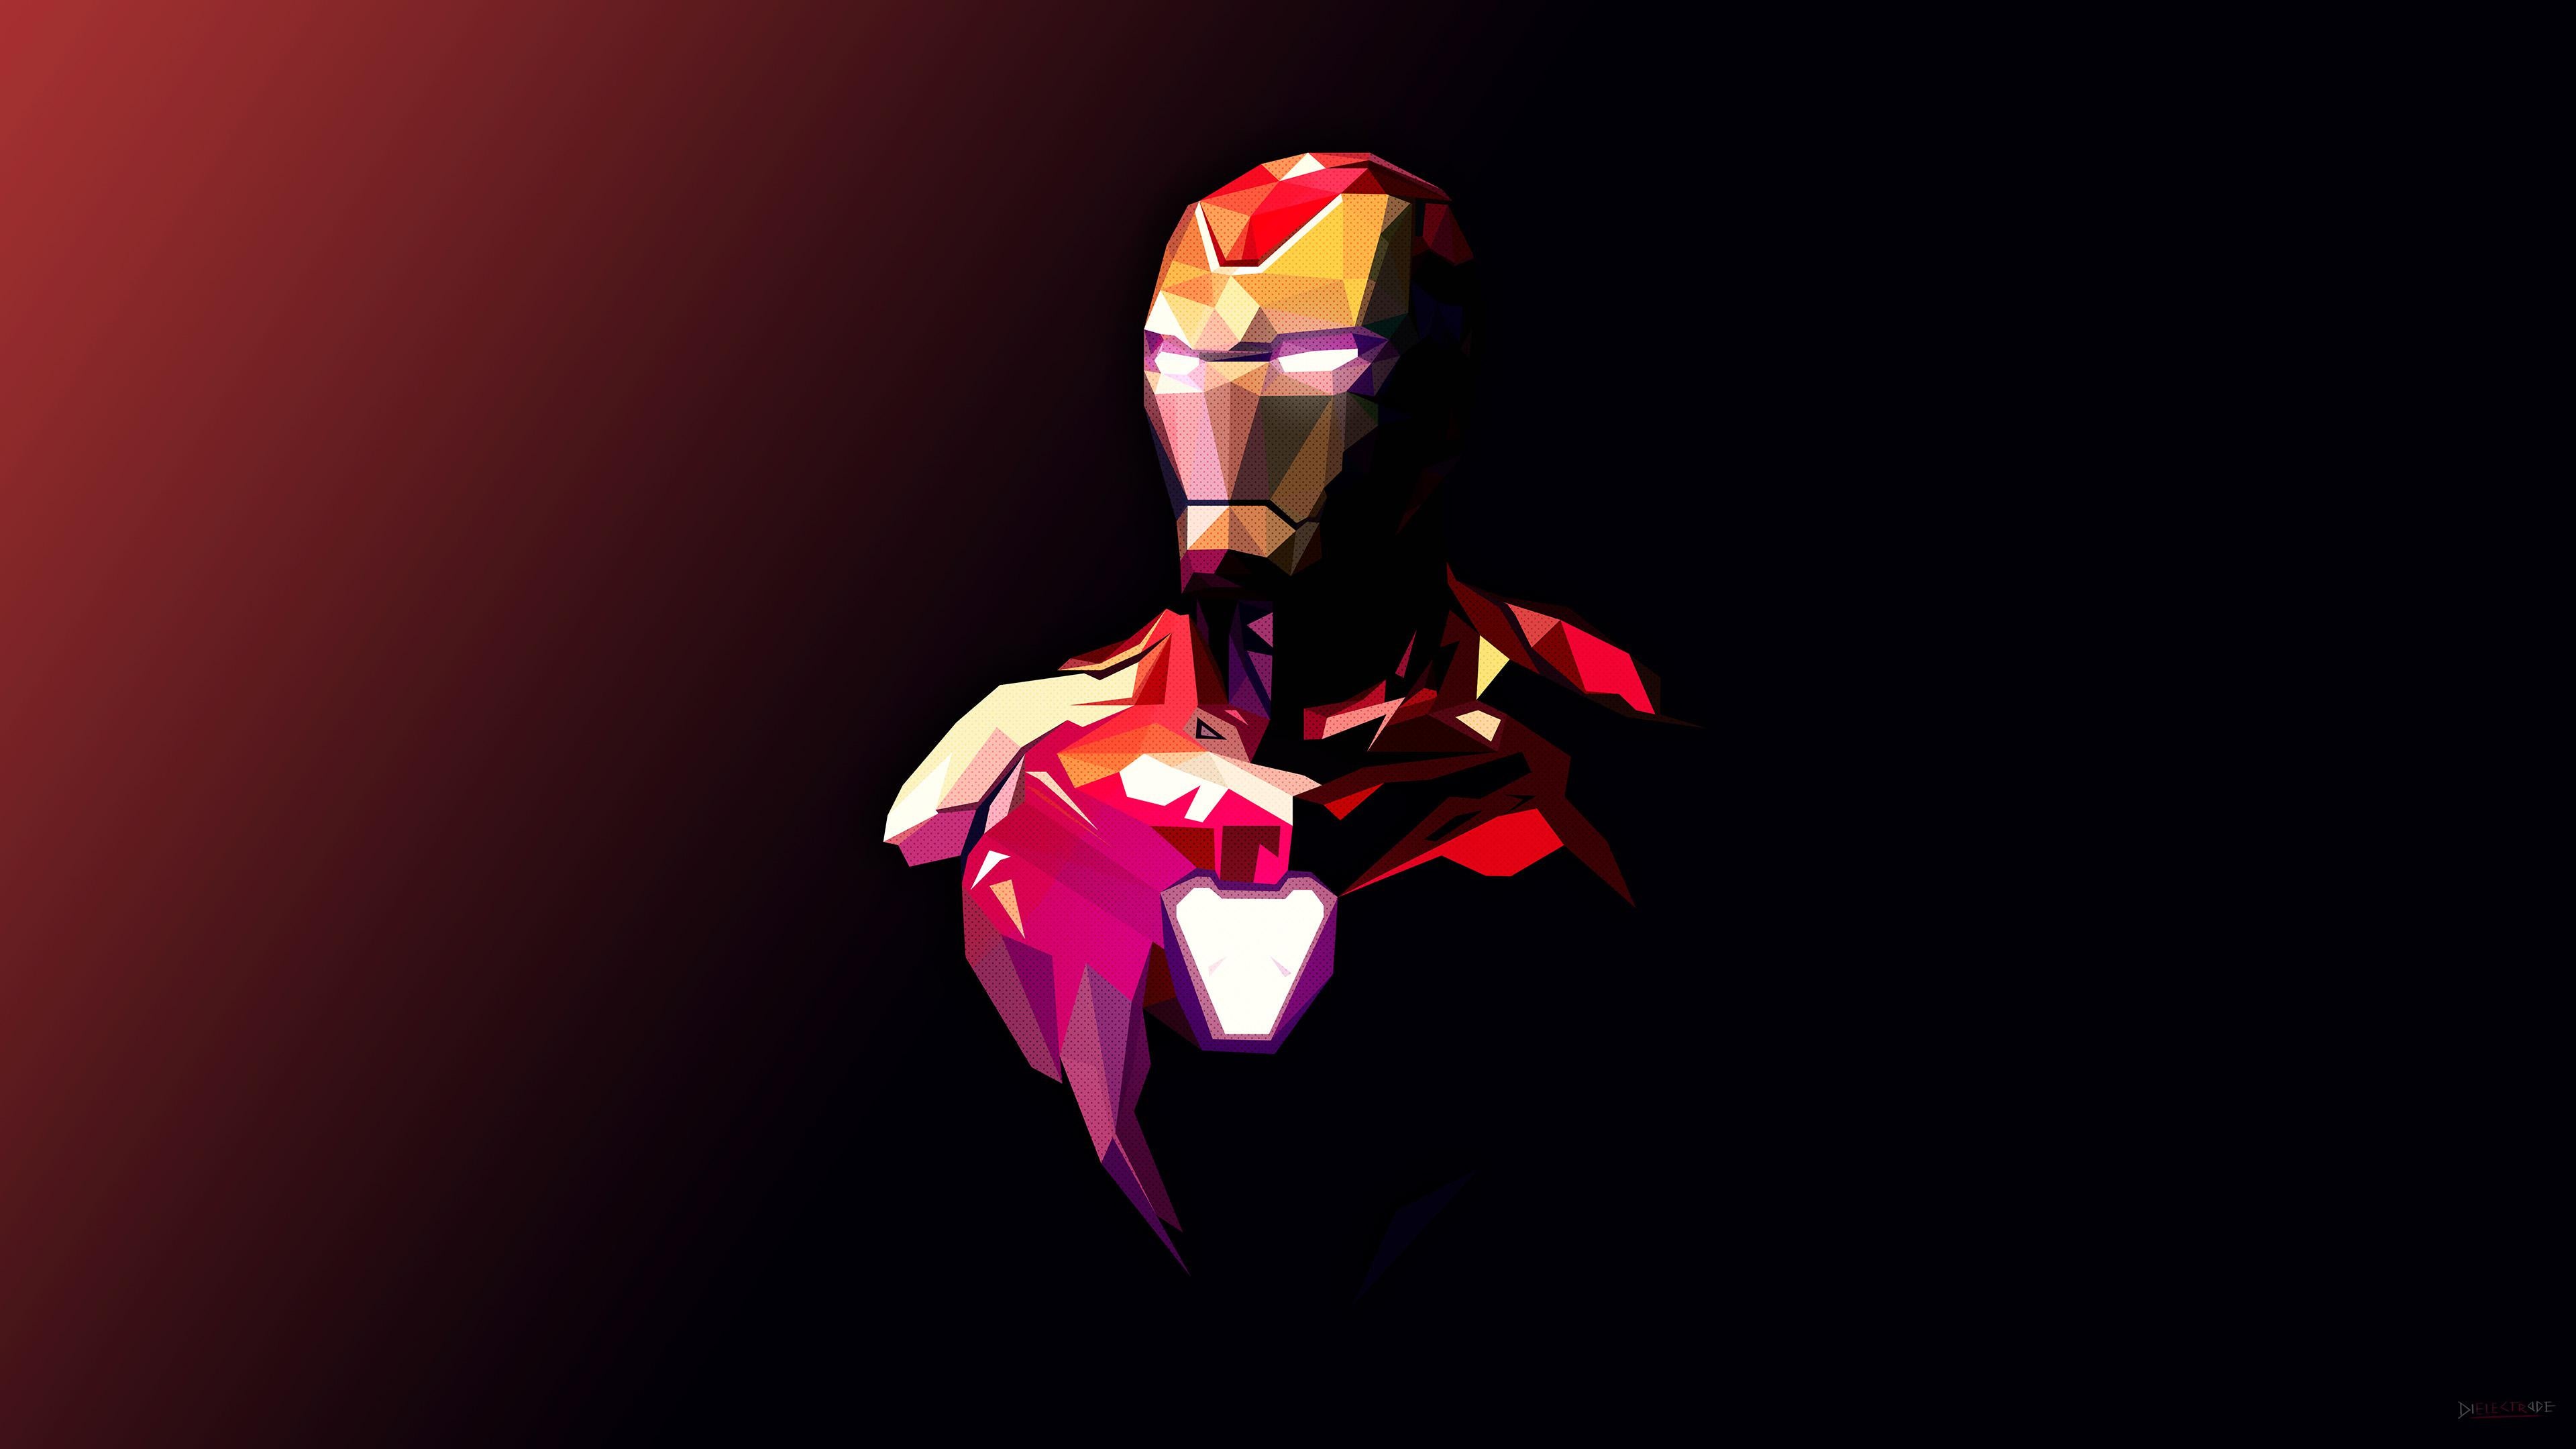 Top 999+ Avengers Iphone Wallpaper Full HD, 4K✓Free to Use